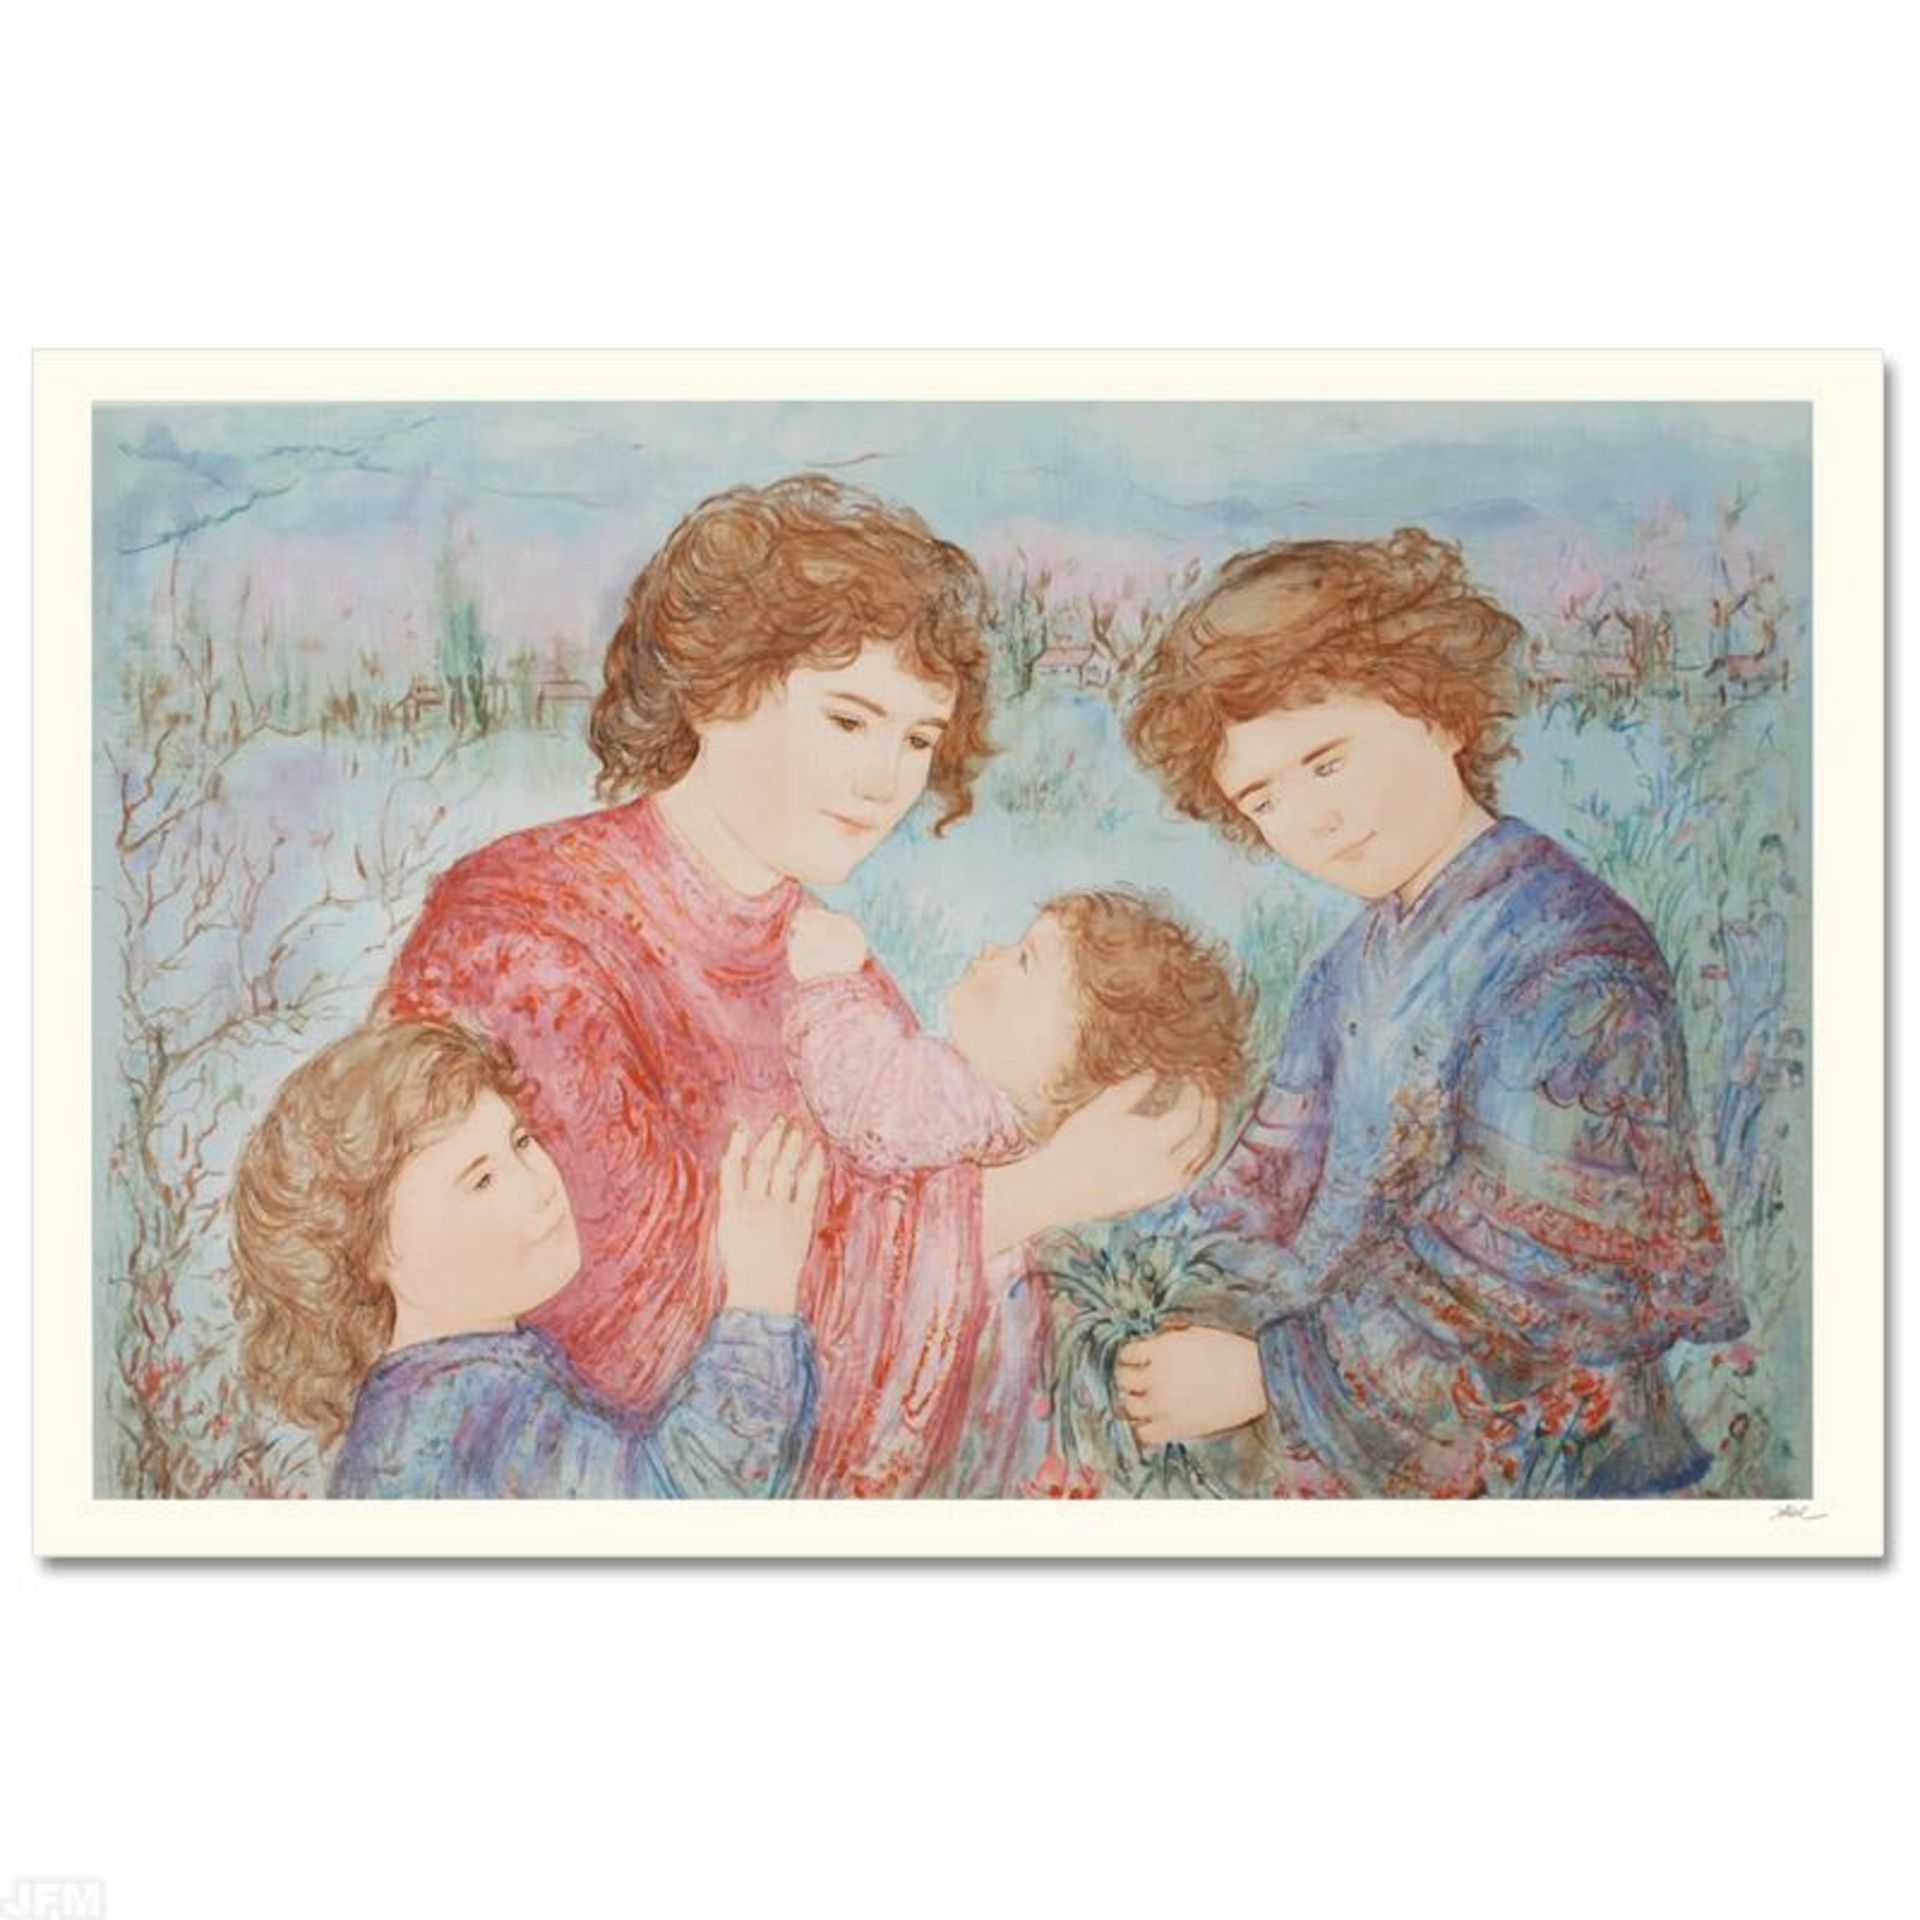 "Early Spring" Limited Edition Serigraph by Edna Hibel (1917-2014), Numbered and